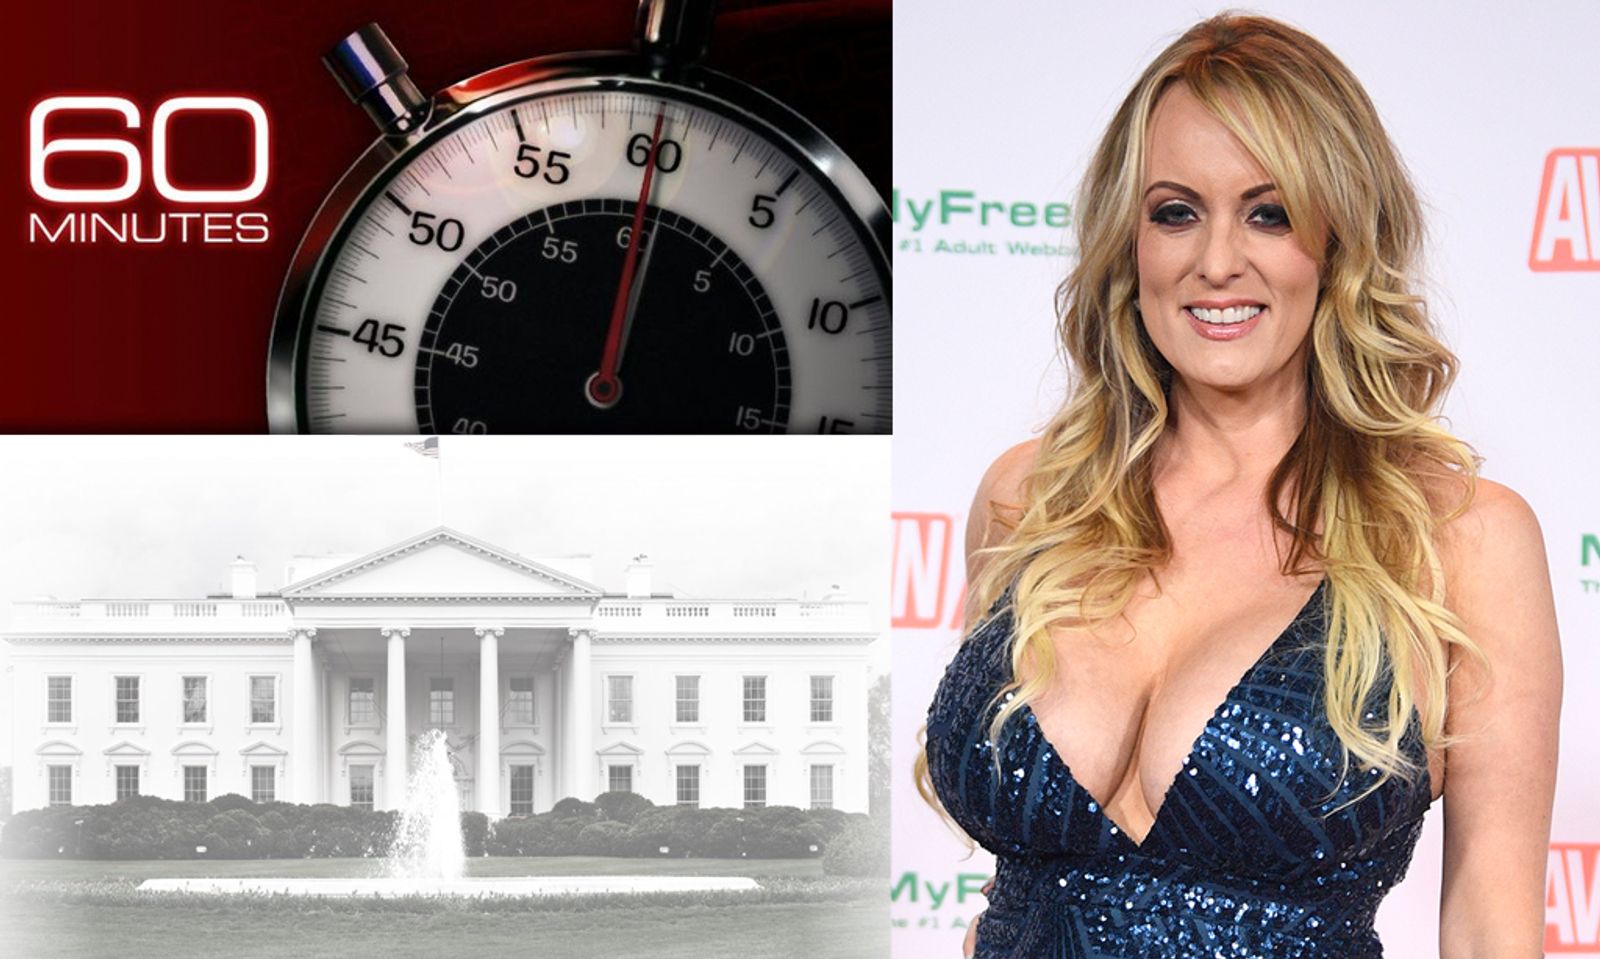 Stormy Daniels 60 Minutes Interview Will Air, CBS Boss Says